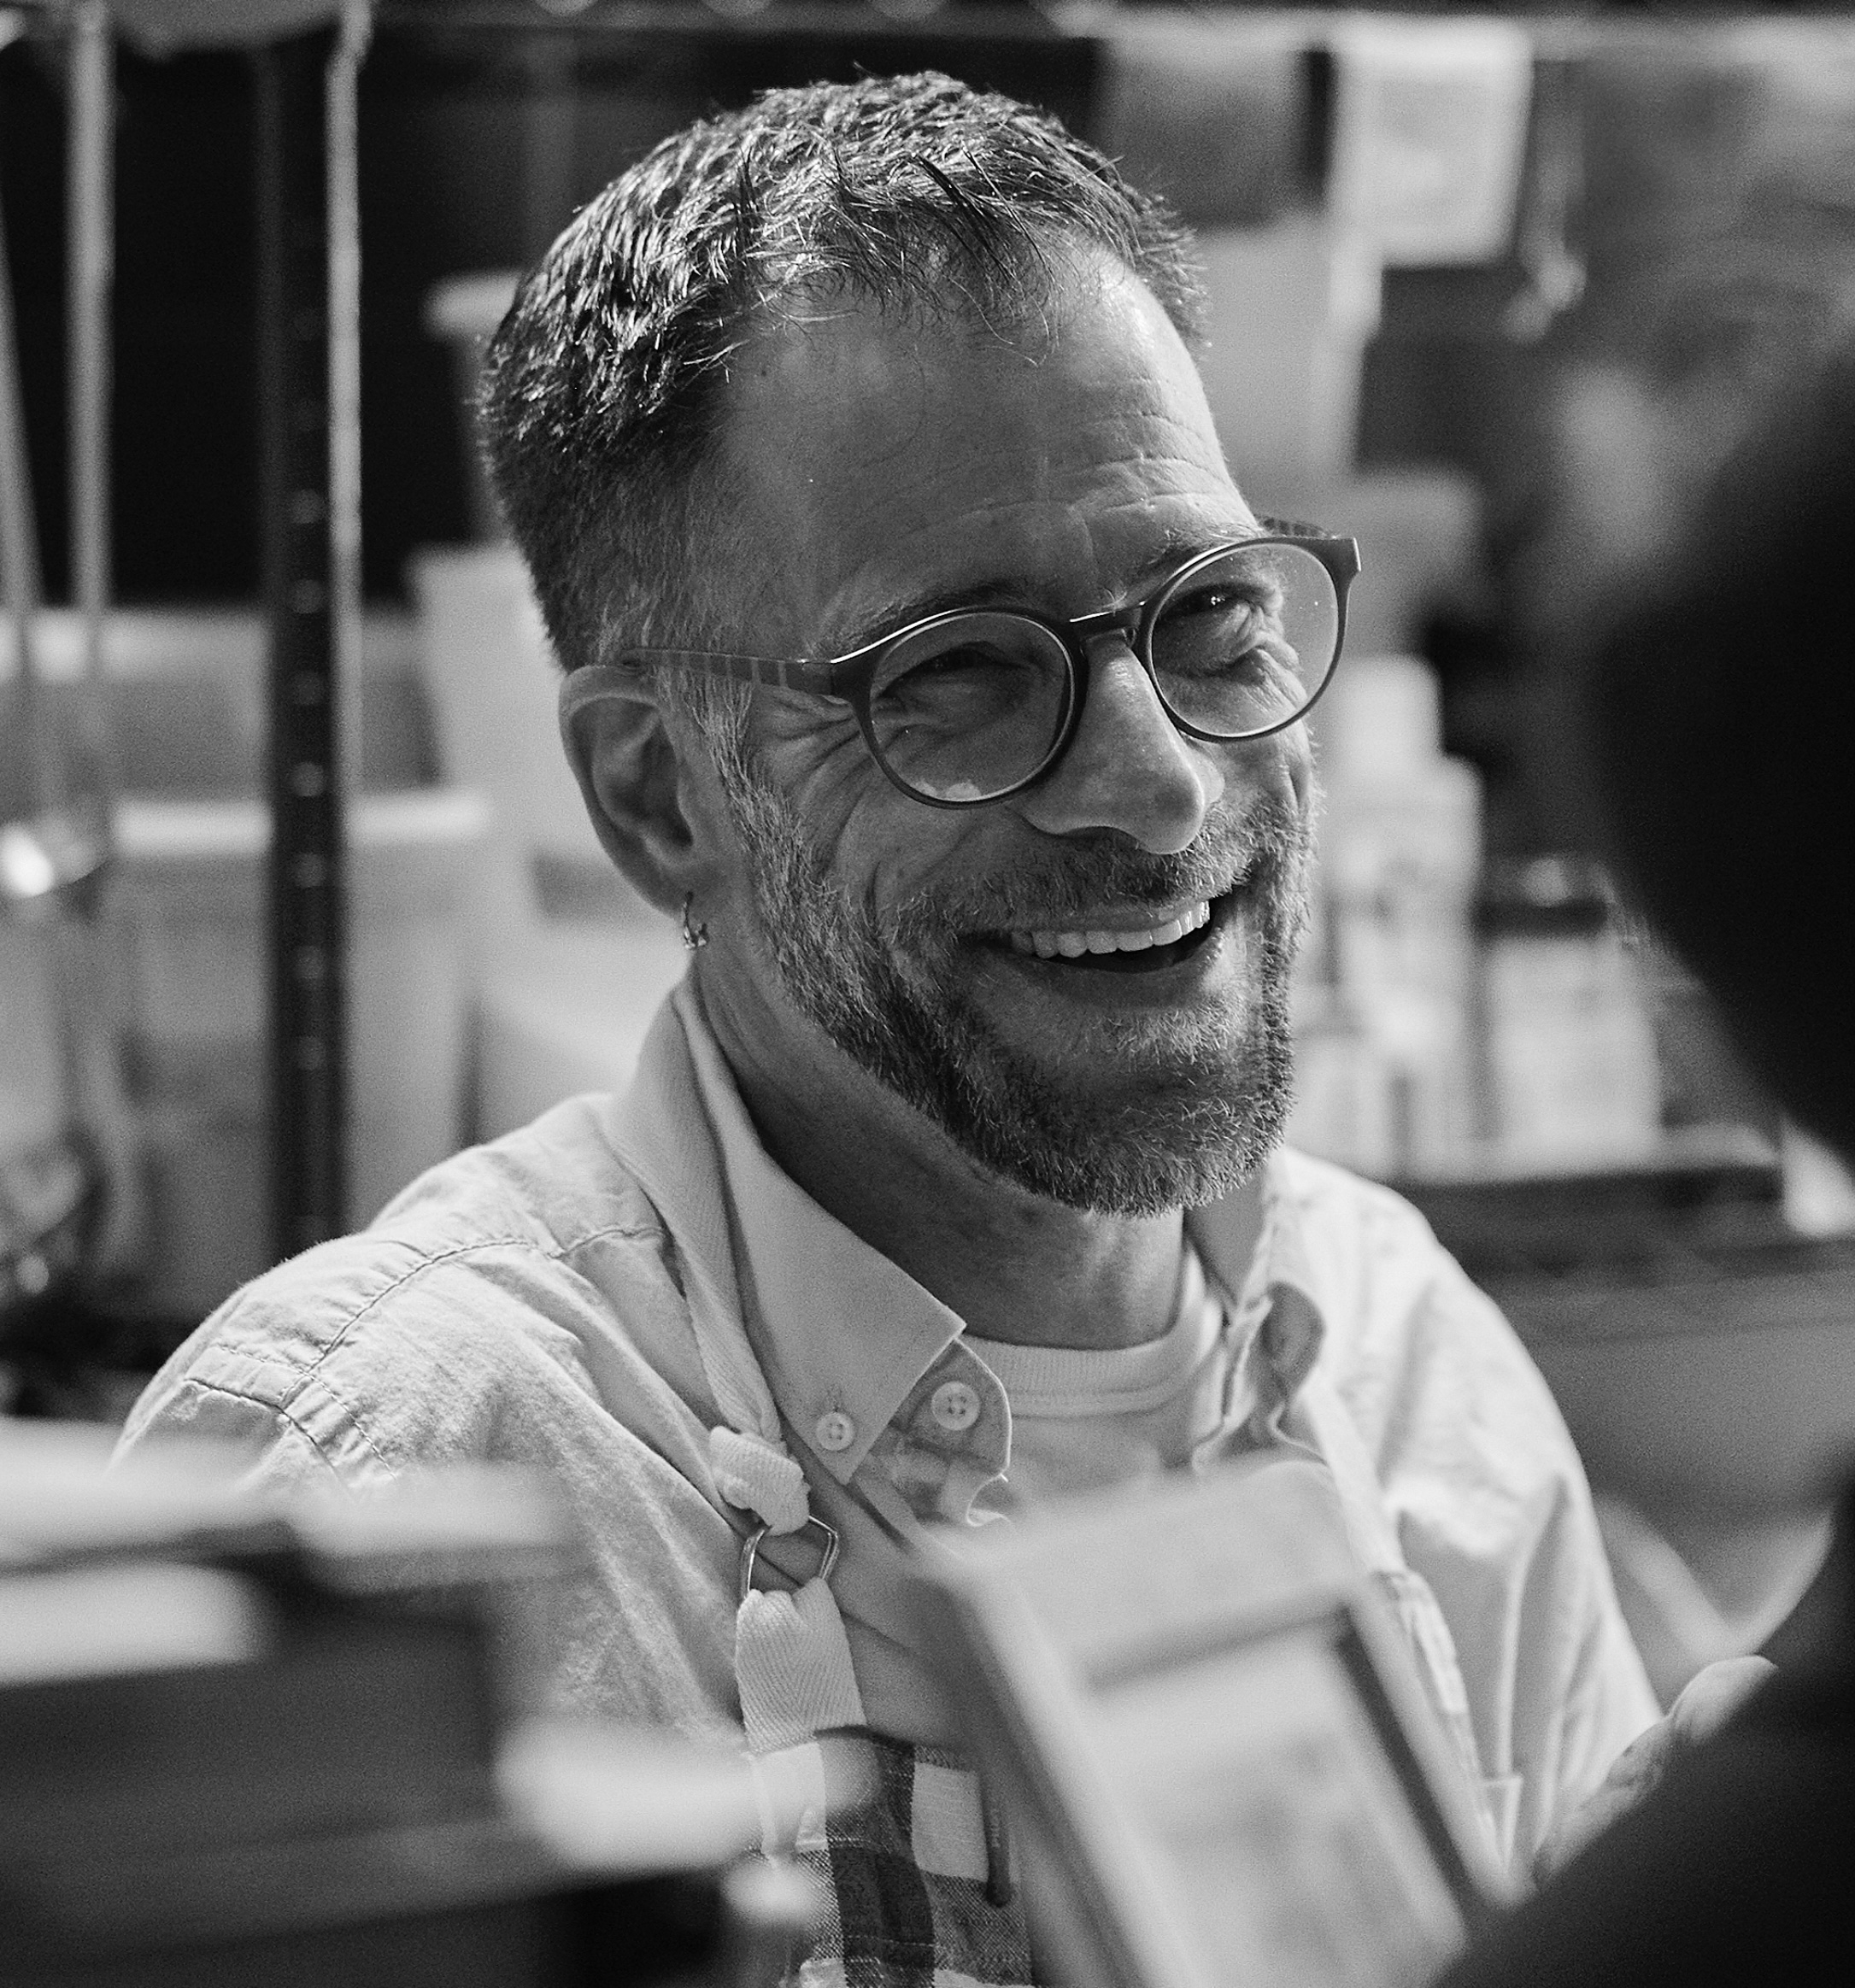 Gregory León, chef and owner of Milwaukee-based restaurant Amilinda, smiles.